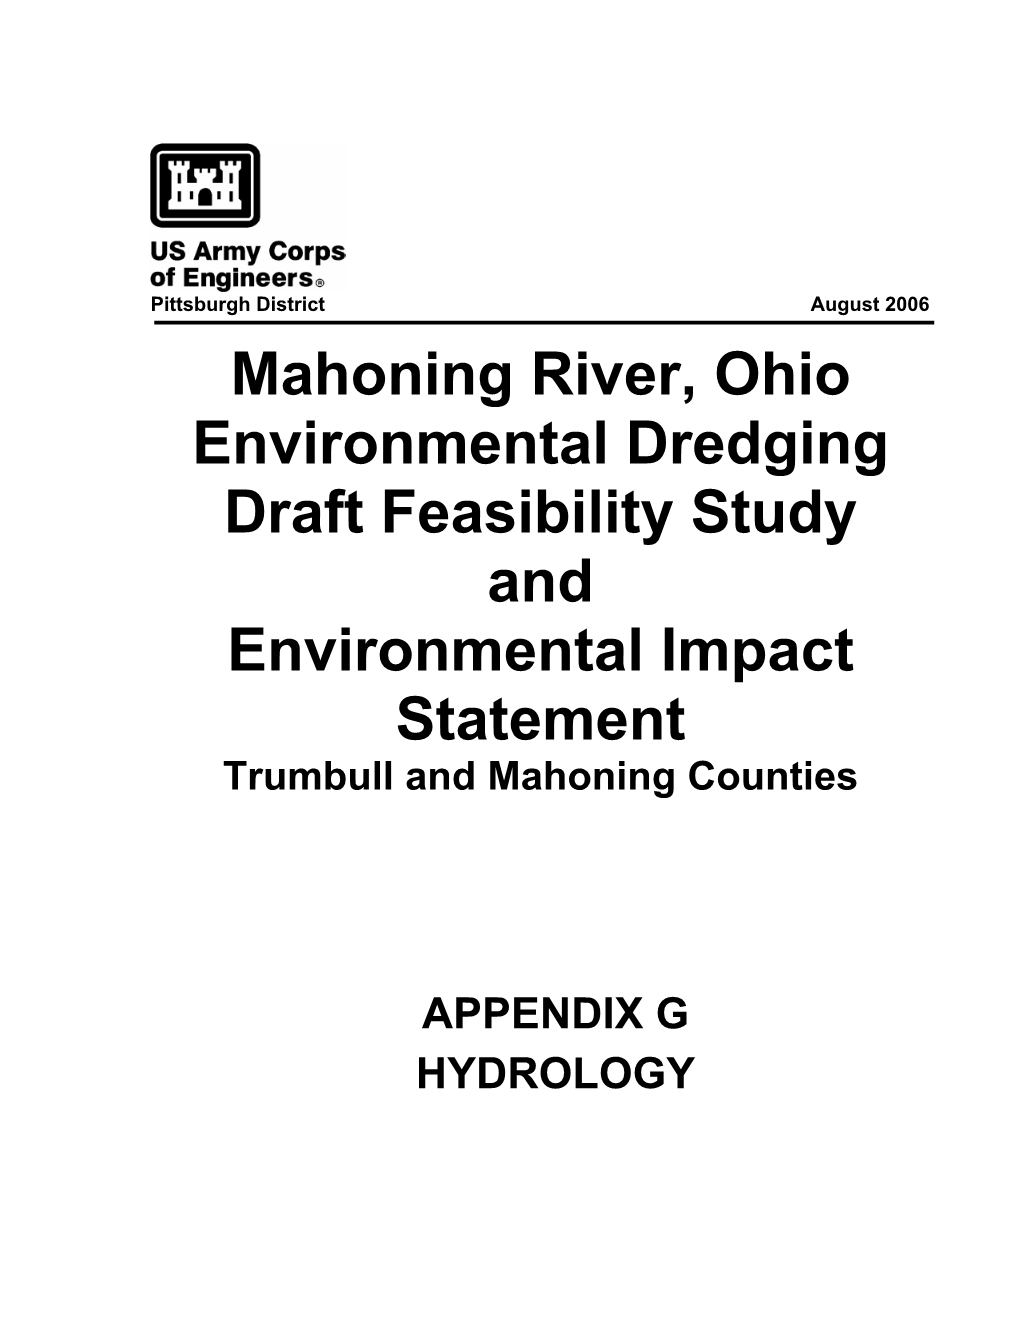 Mahoning River, Ohio Environmental Dredging Draft Feasibility Study and Environmental Impact Statement Trumbull and Mahoning Counties